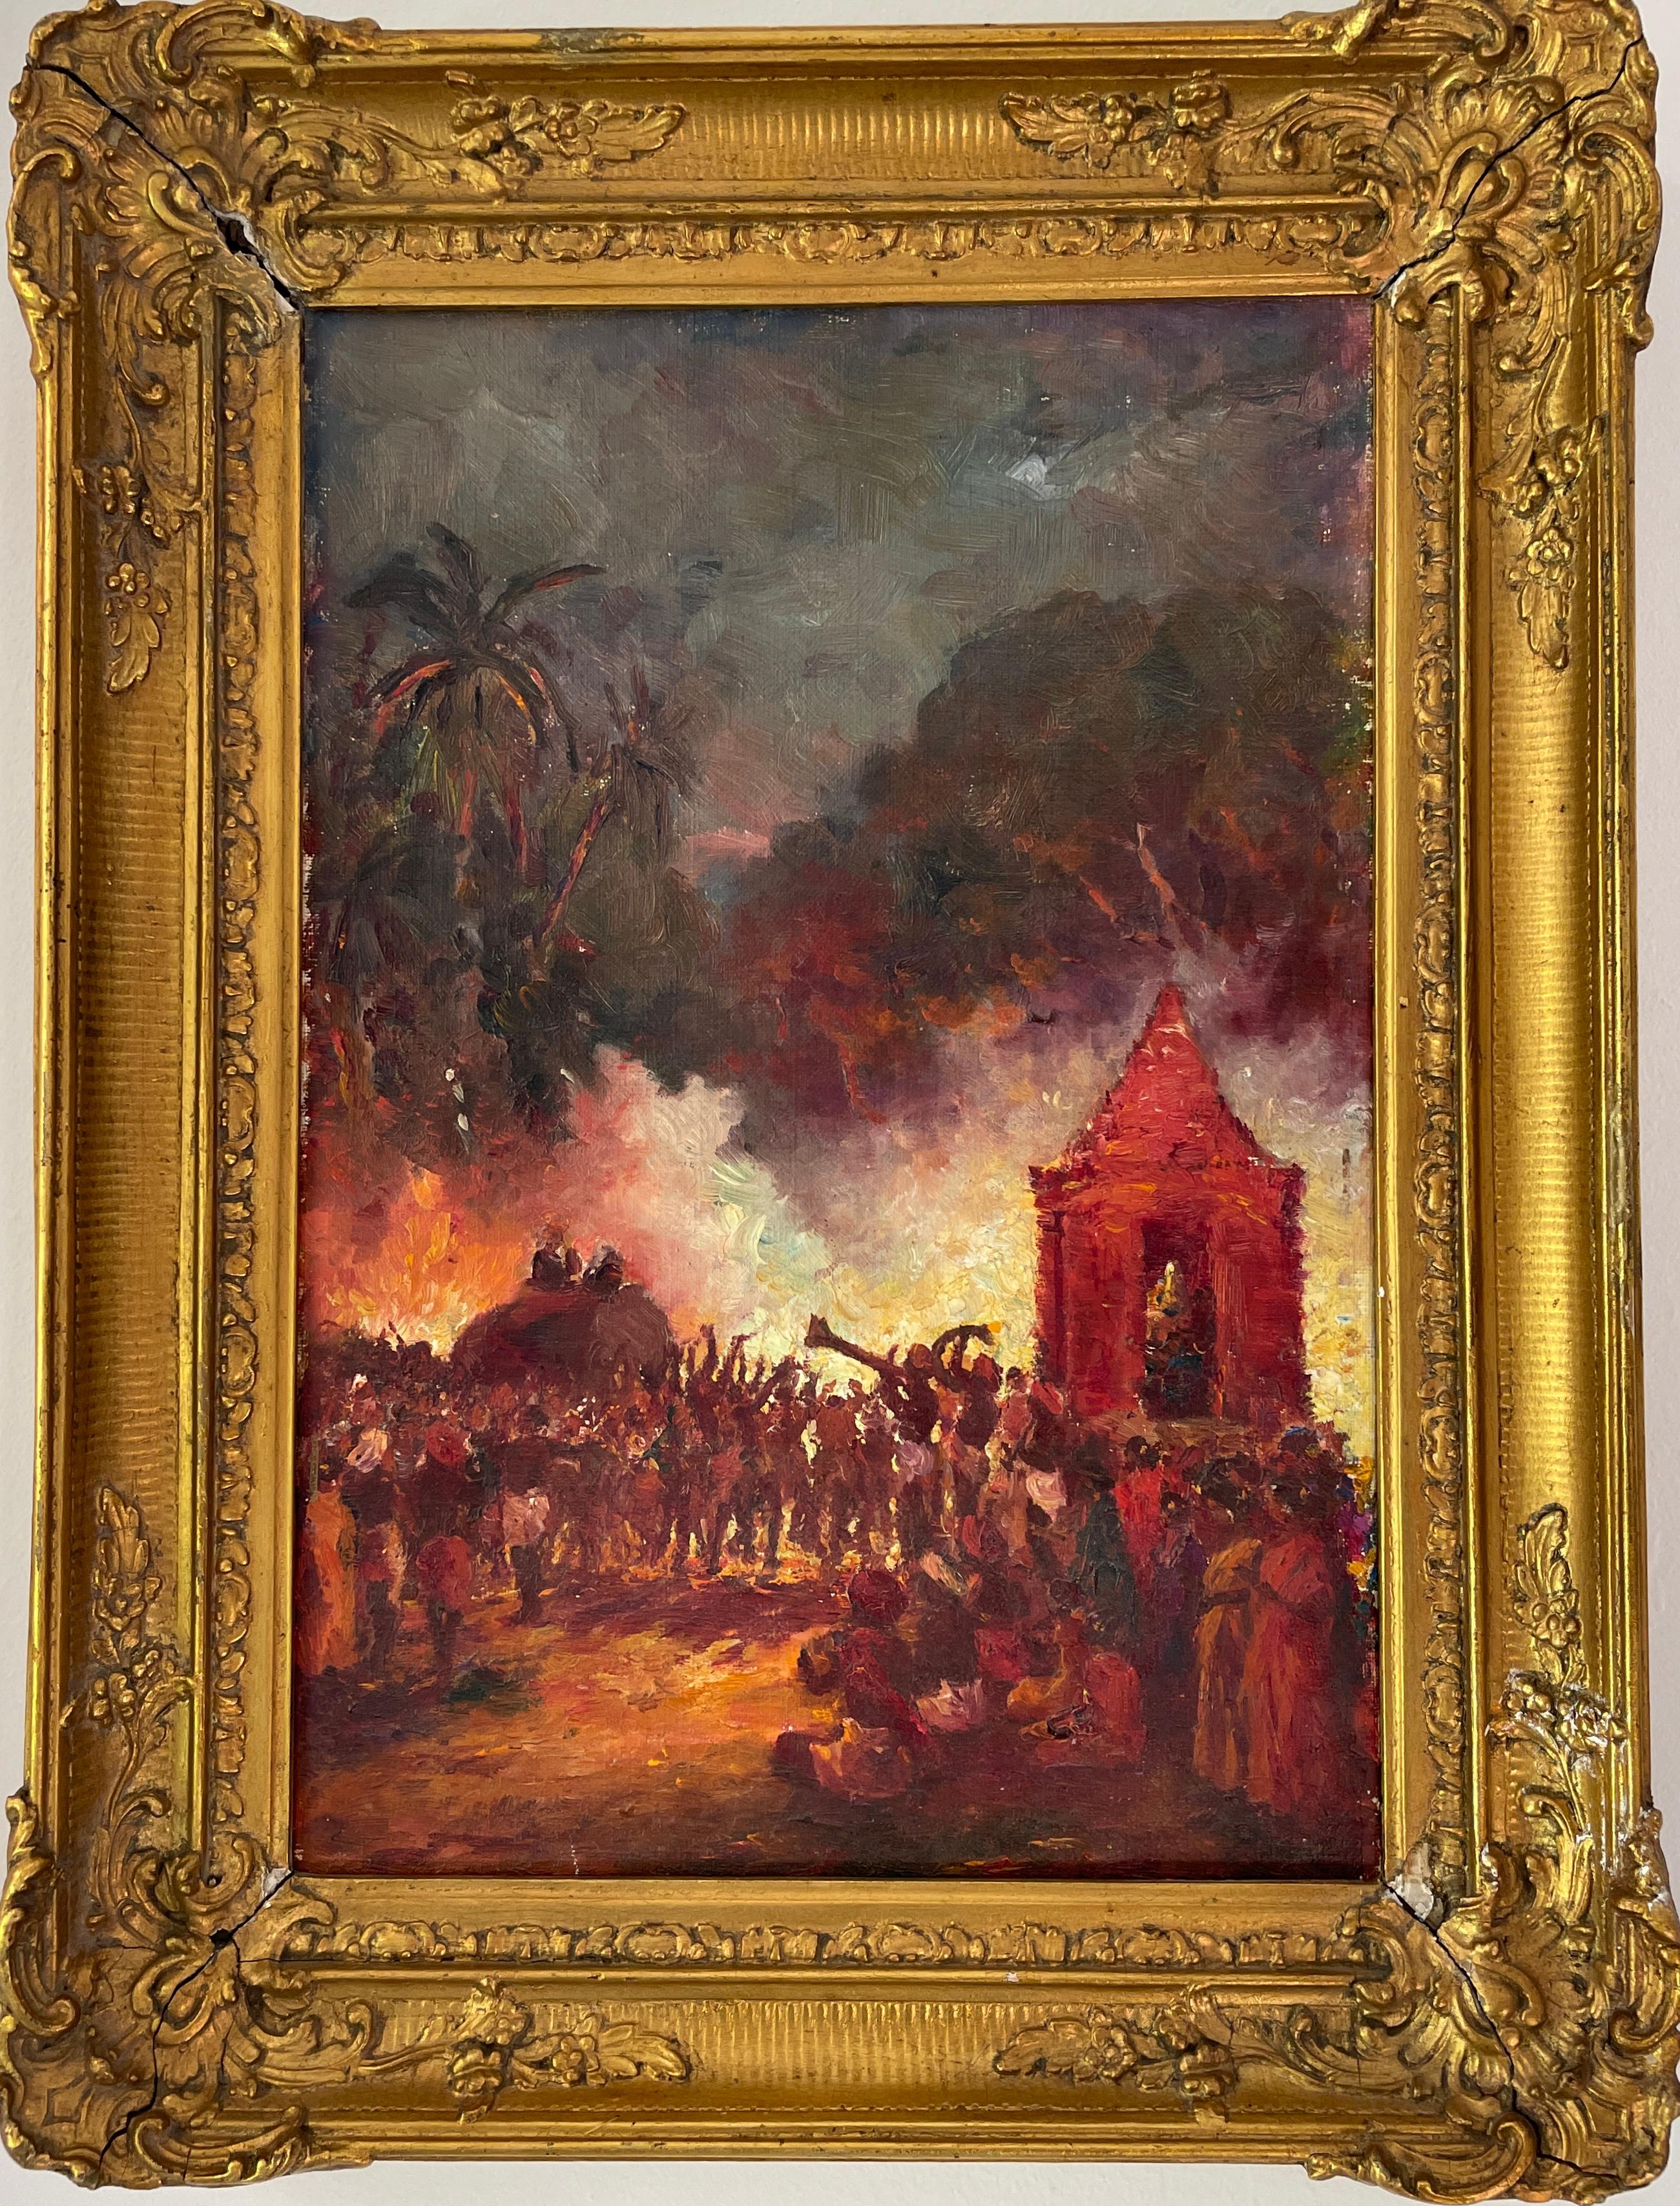 South Indian Oil on Canvas Painting Late 19th Early 20th Century Festival Night